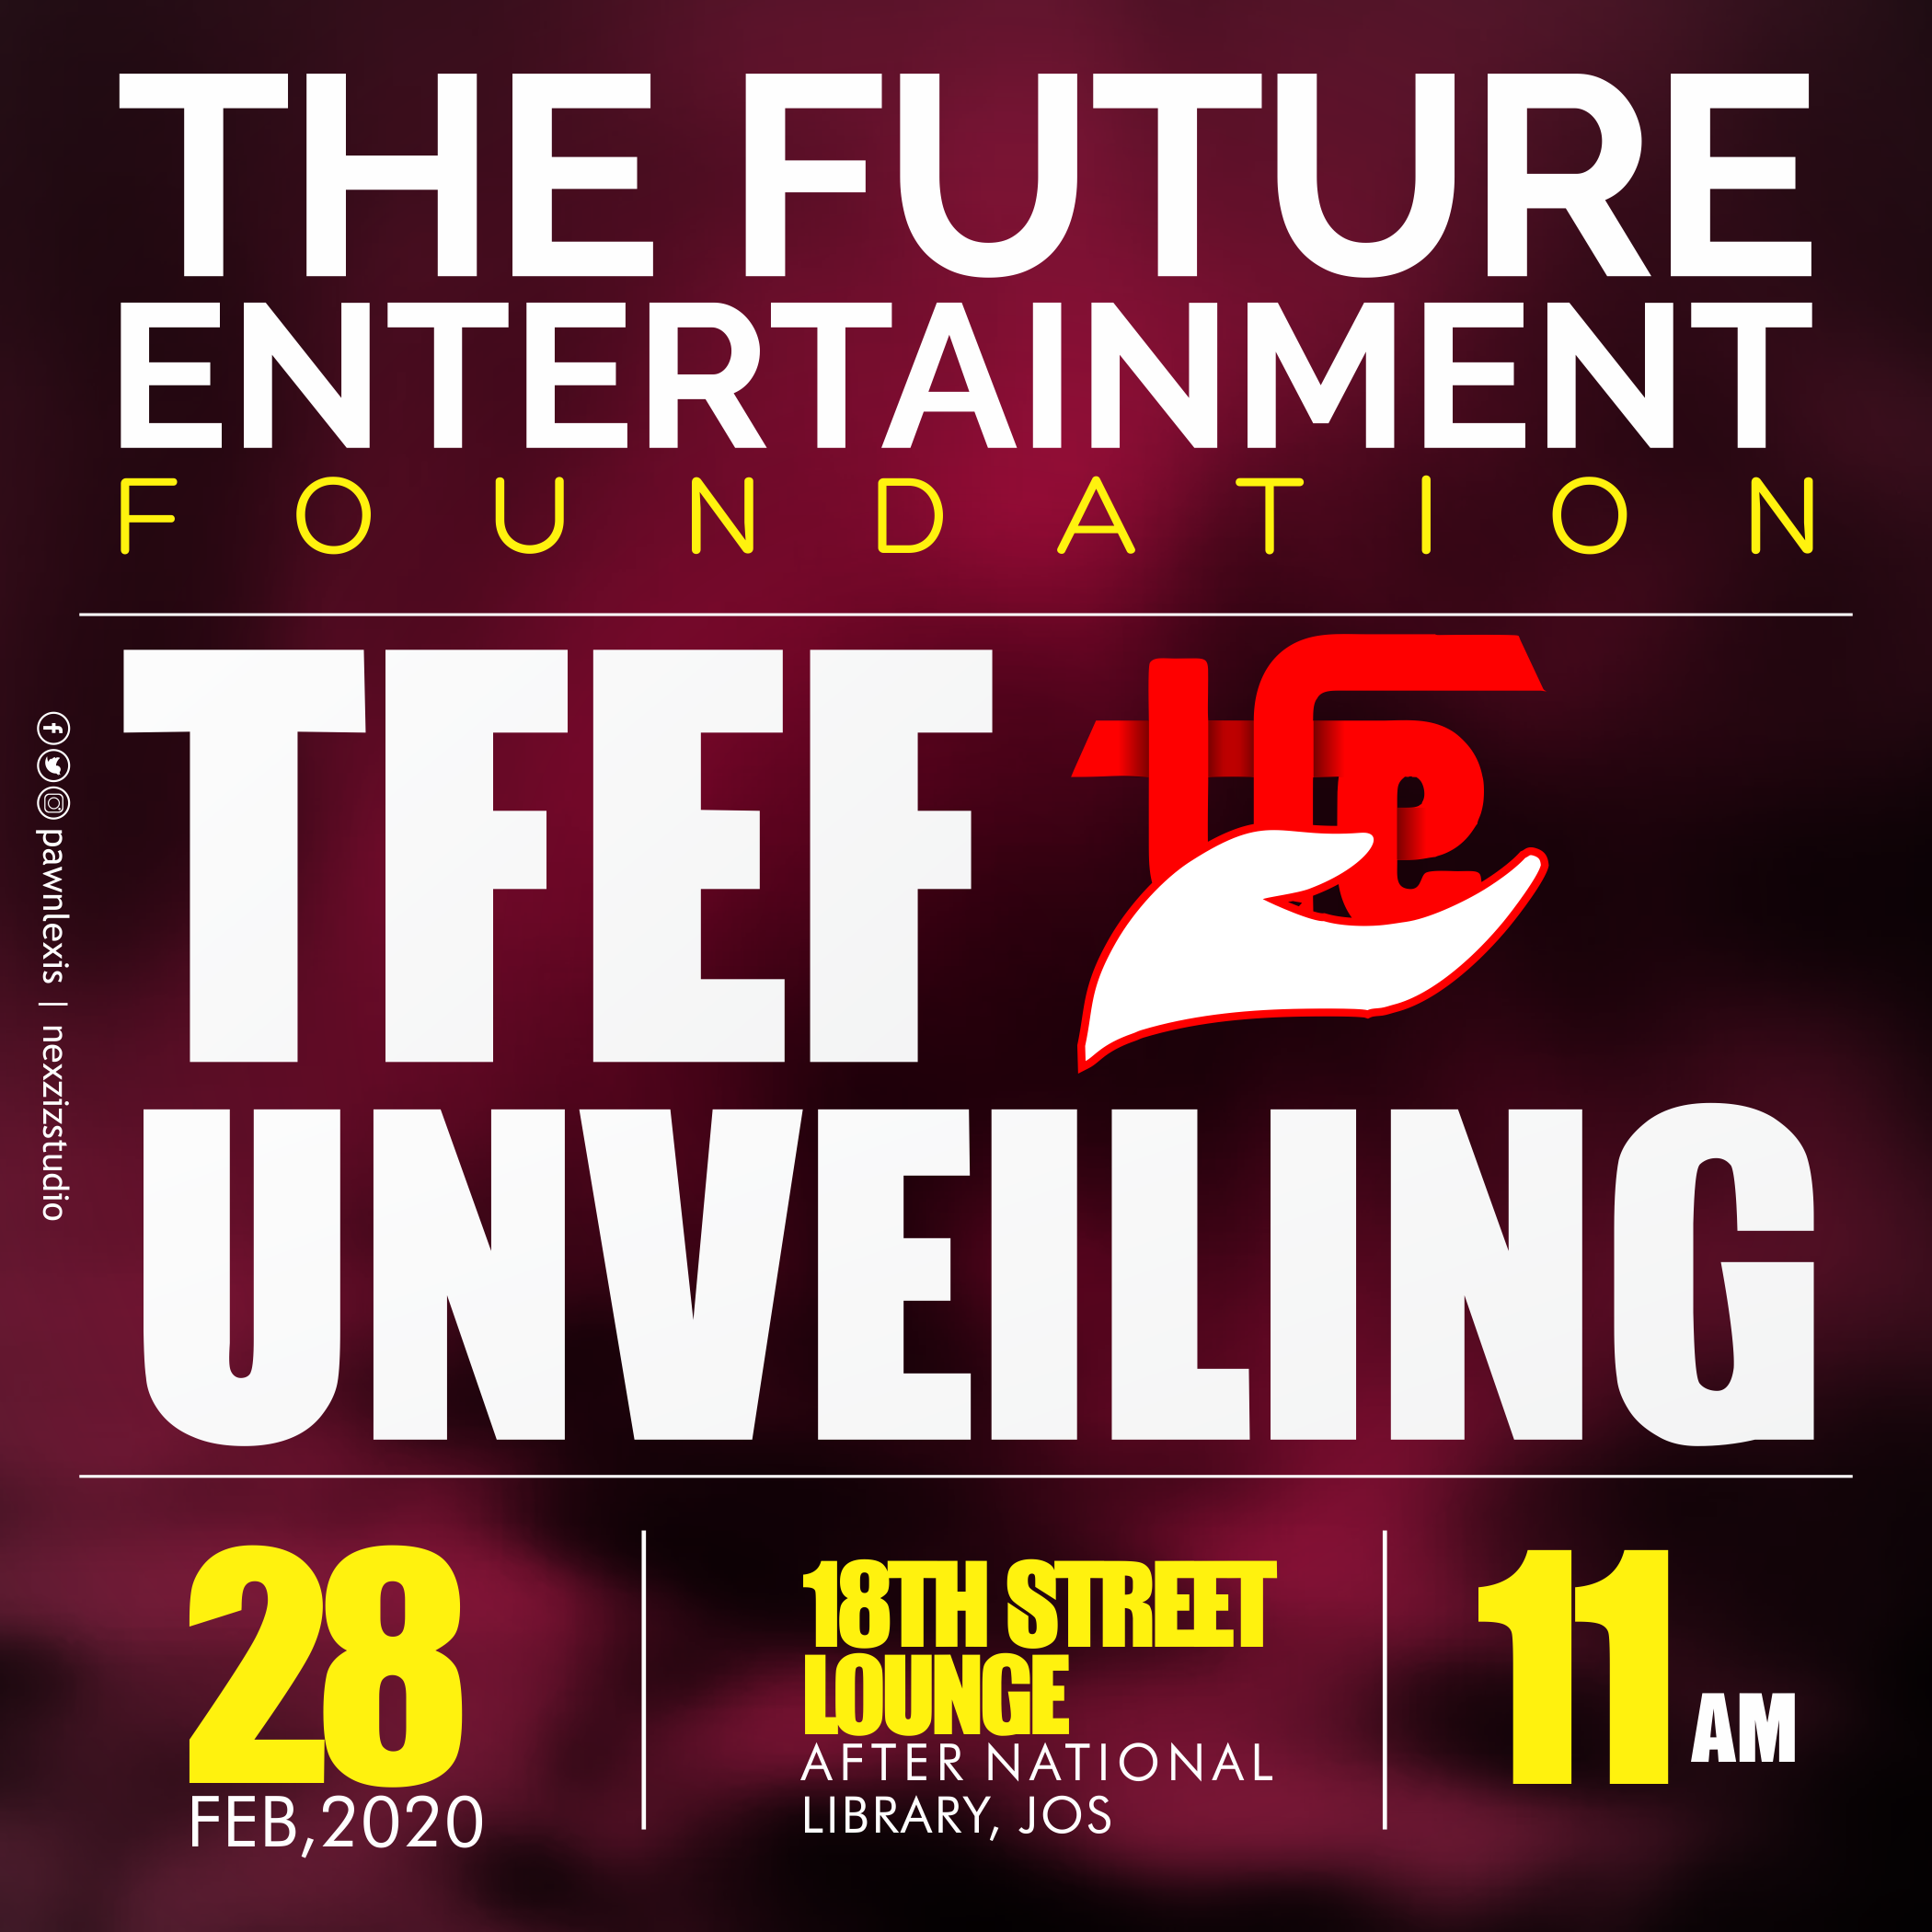 The future entertainment foundation is unveiling